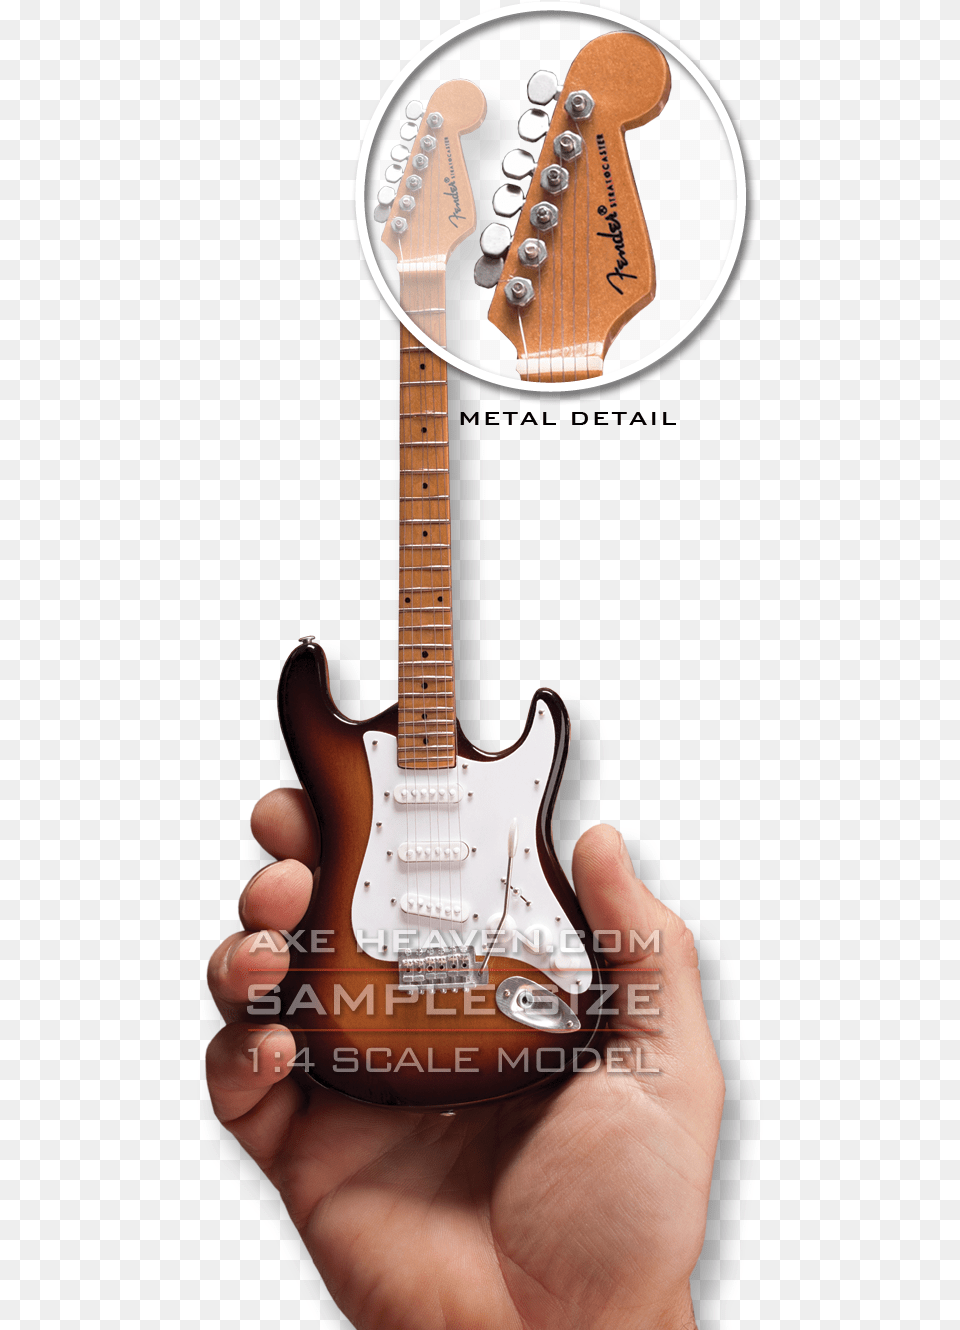 Axe Heaven Has Created Officially Licensed By Fender Axe Heaven Journey Escape Album Acoustic Miniature, Guitar, Musical Instrument, Electric Guitar, Body Part Png